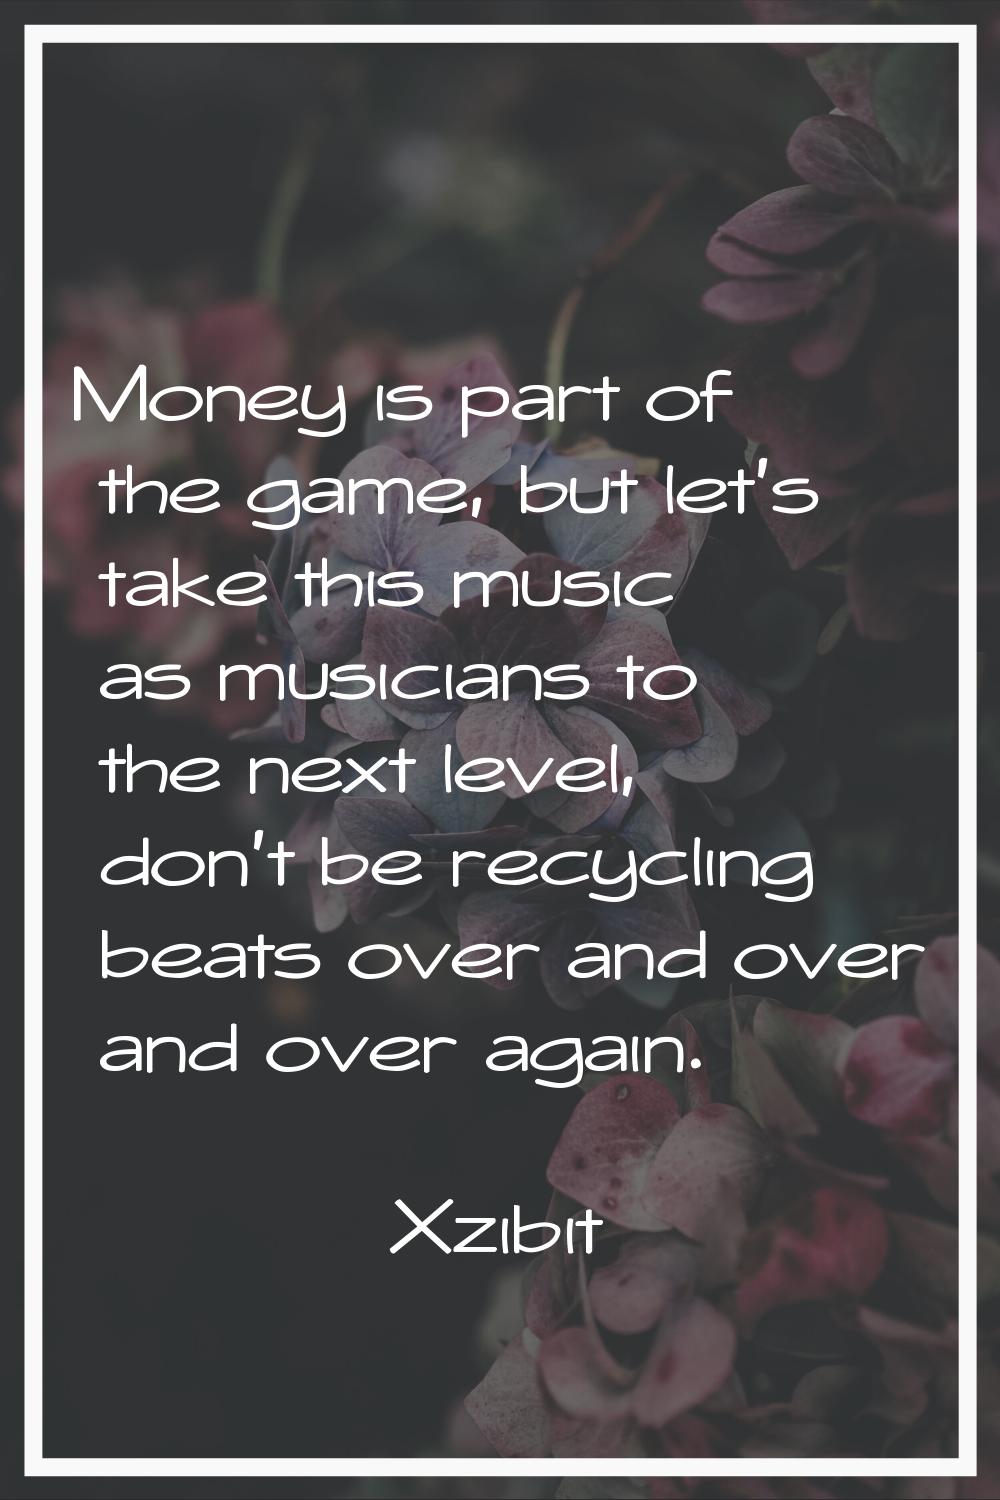 Money is part of the game, but let's take this music as musicians to the next level, don't be recyc